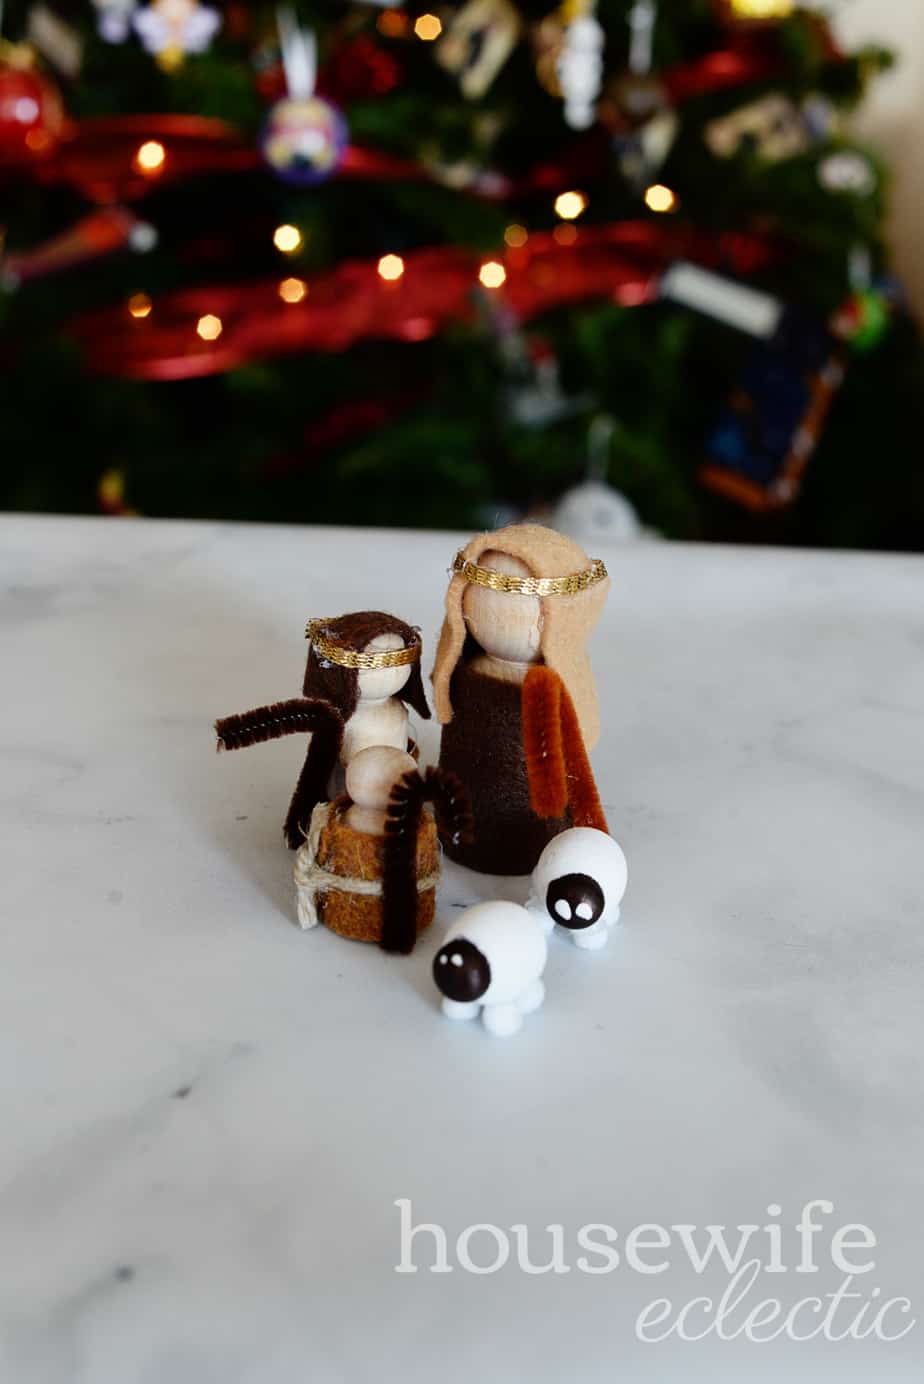 Housewife Eclectic: DIY Peg Nativity